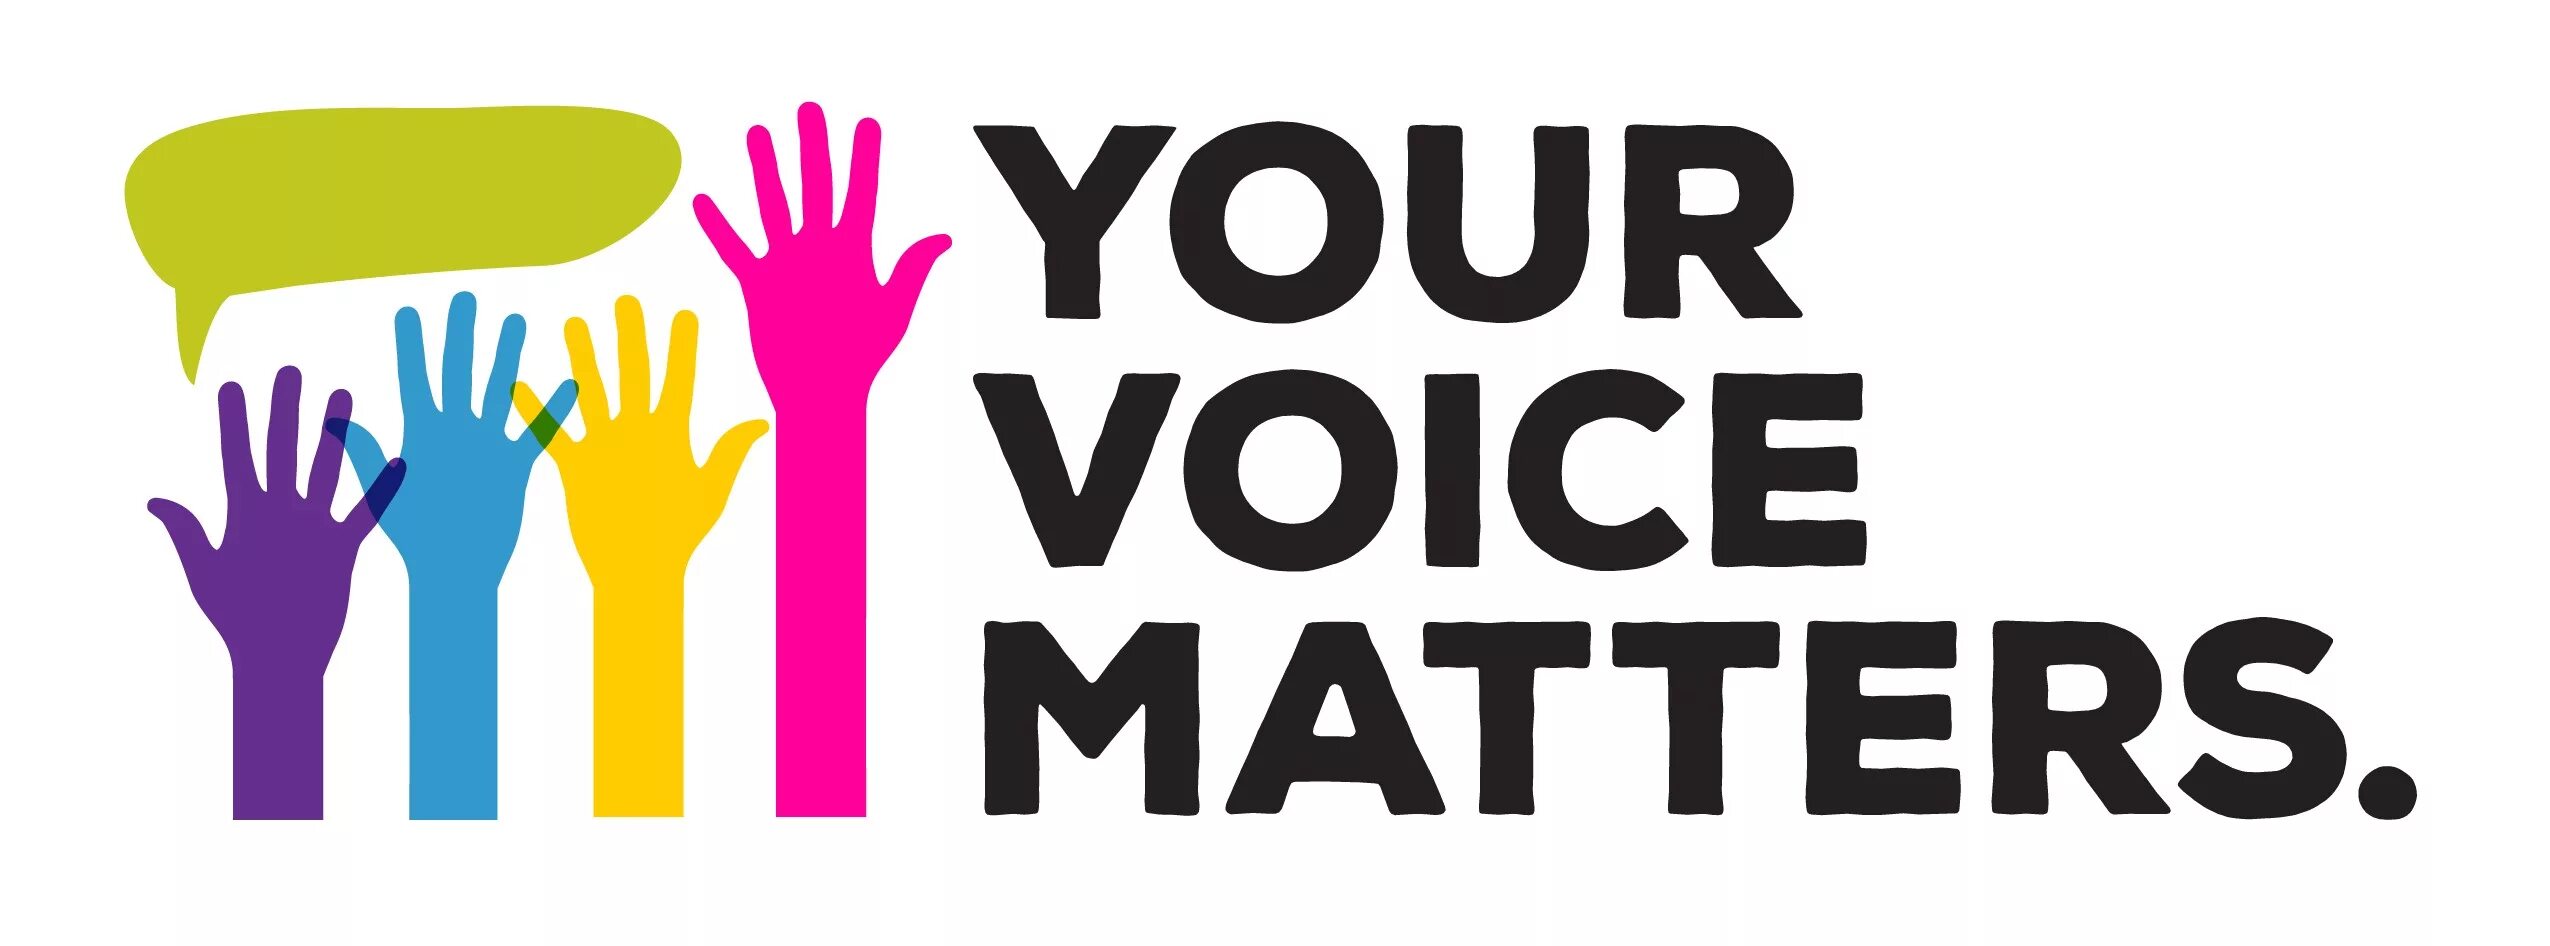 Like your voice. Your Voice. Your Voice matters. Your Voice картинки. Картинка use your Voice.